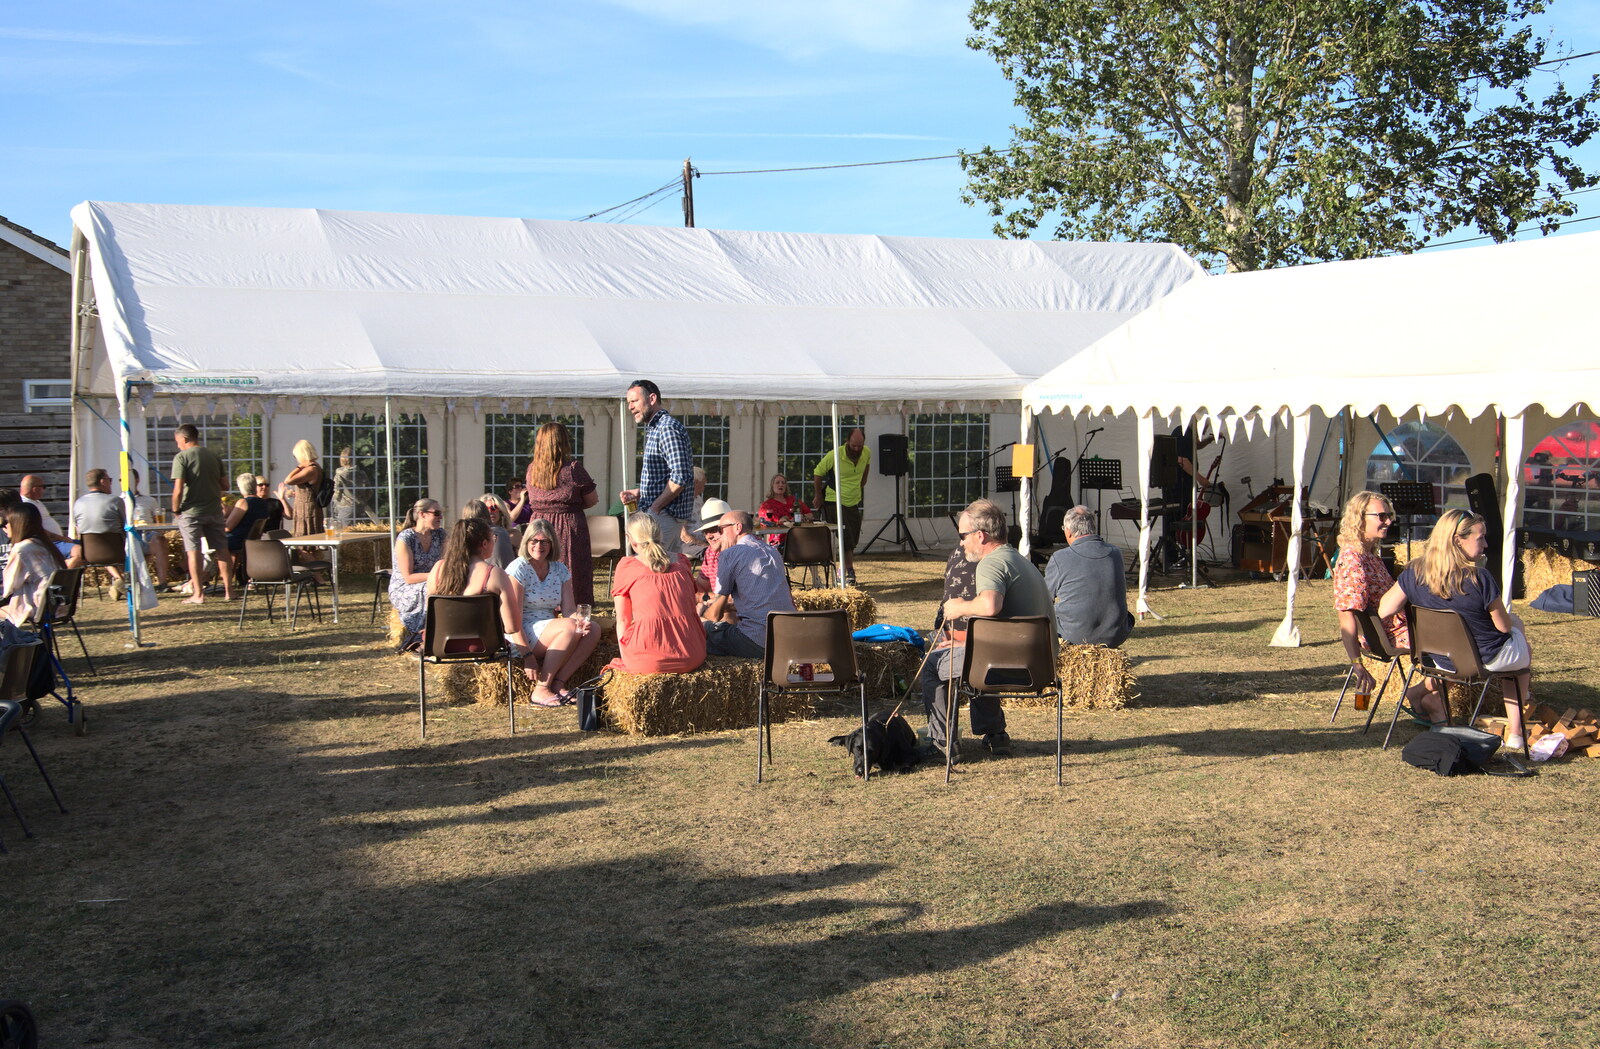 The Denton Beer Festival and a Party, Brockdish, Norfolk - 16th July 2022: The entertainments marquee